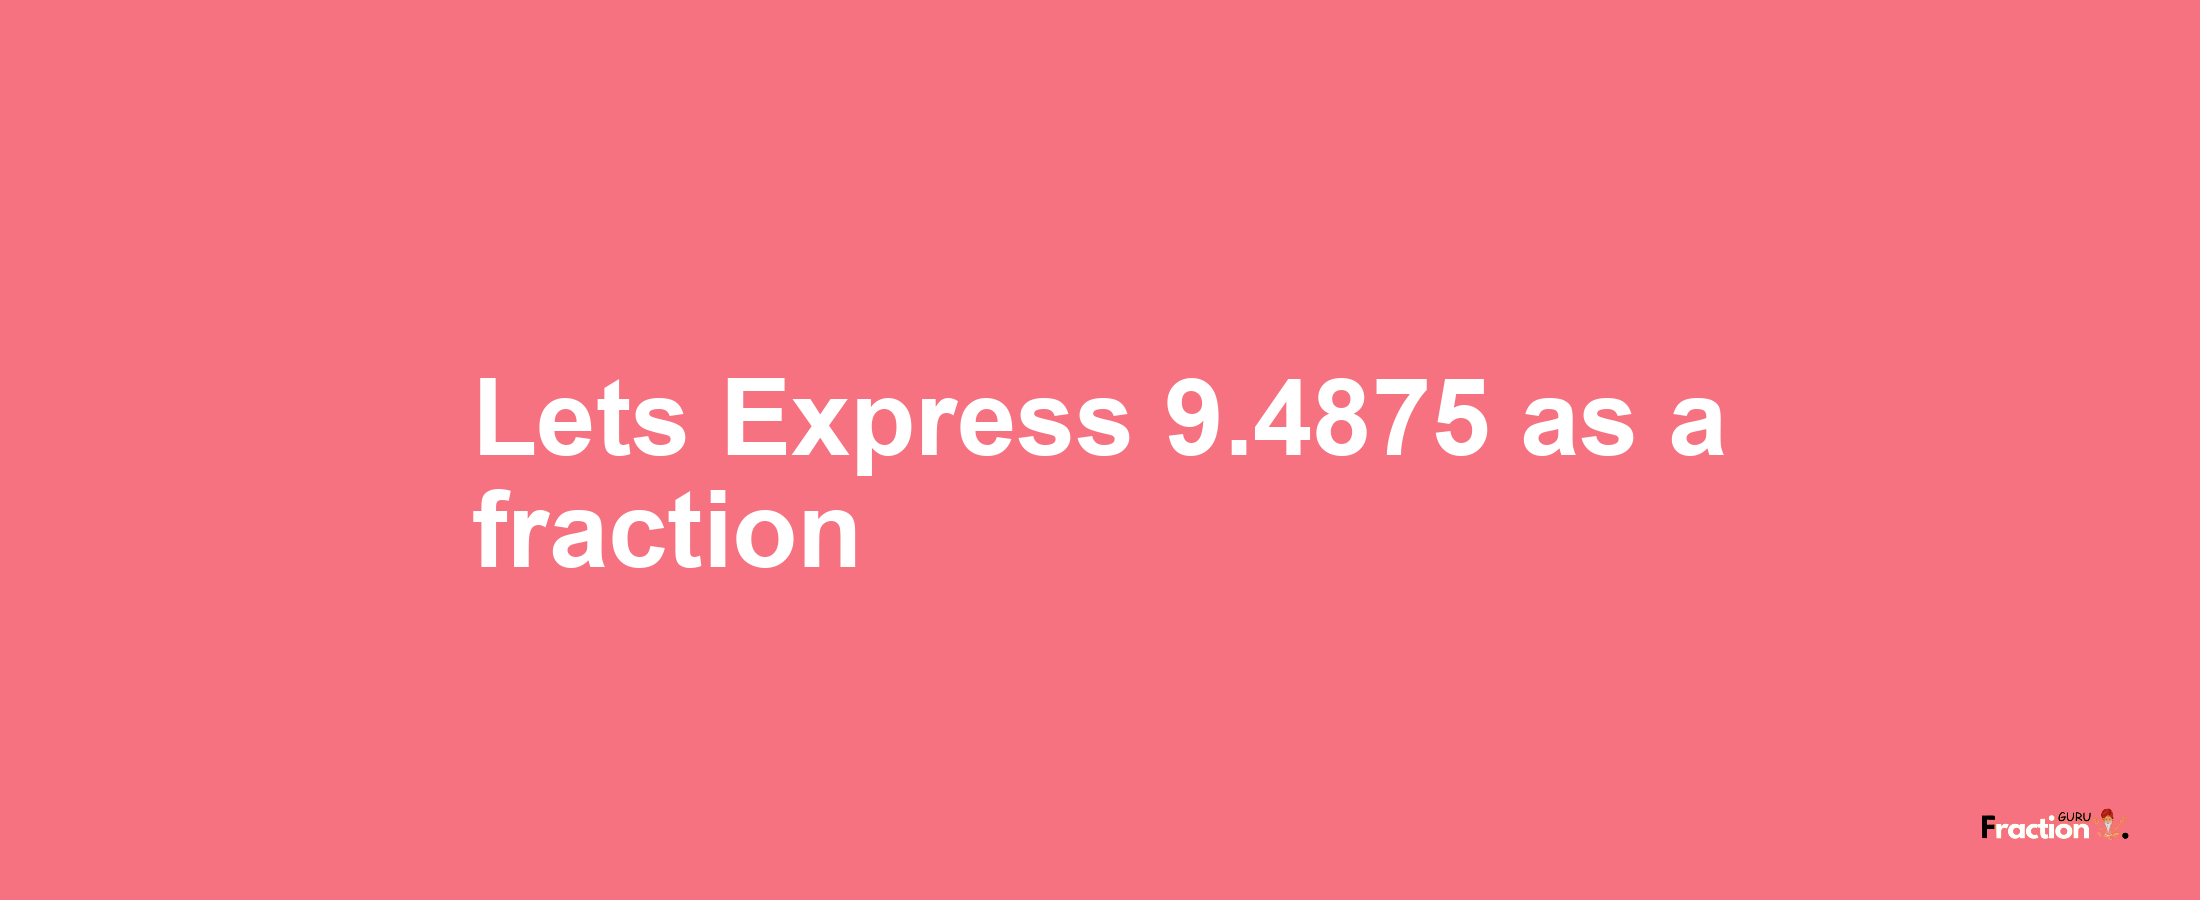 Lets Express 9.4875 as afraction